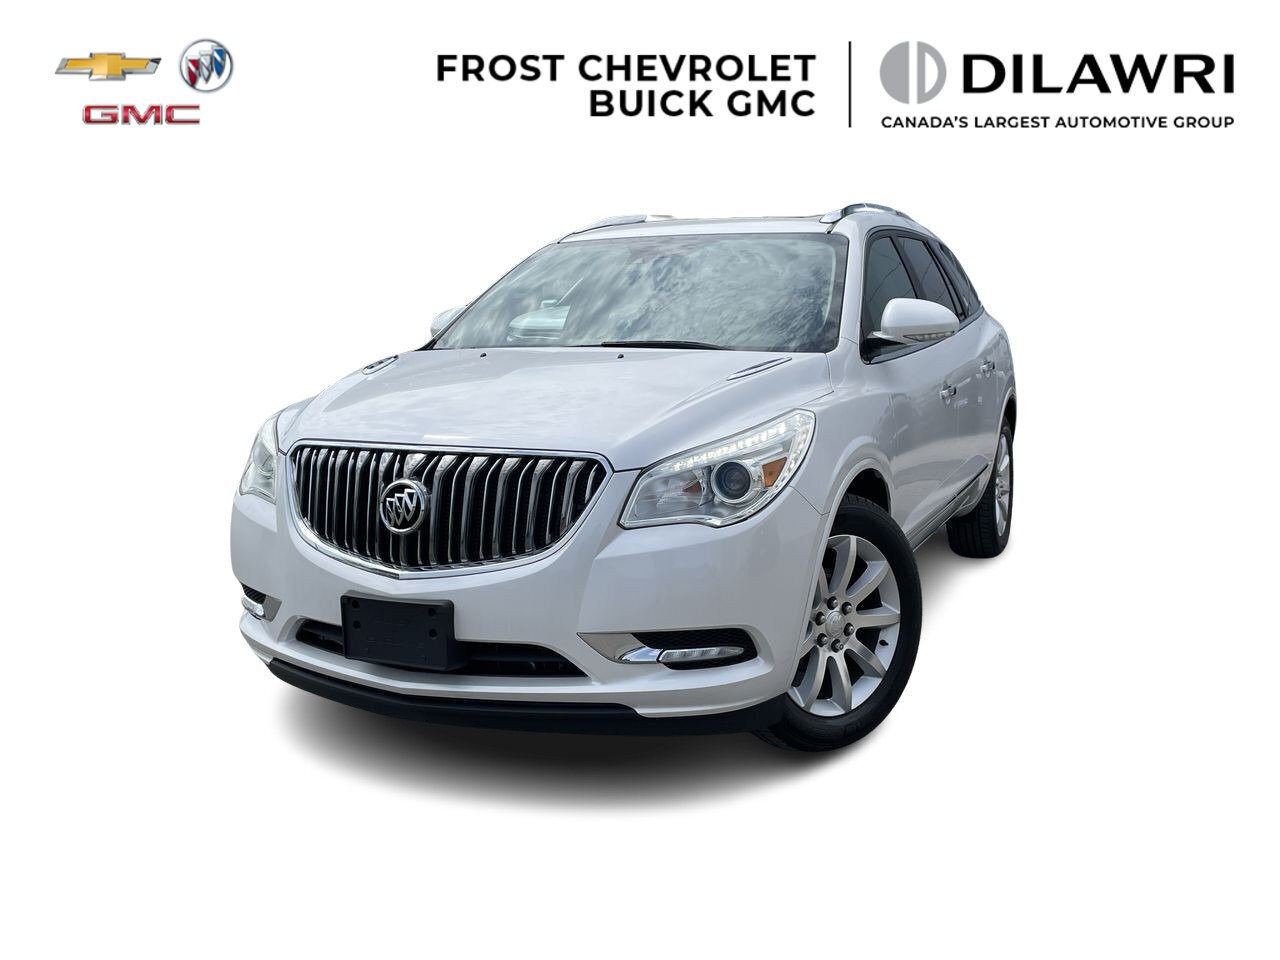 2017 Buick Enclave AWD Premium Leather Seats | Heated Steering Wheel